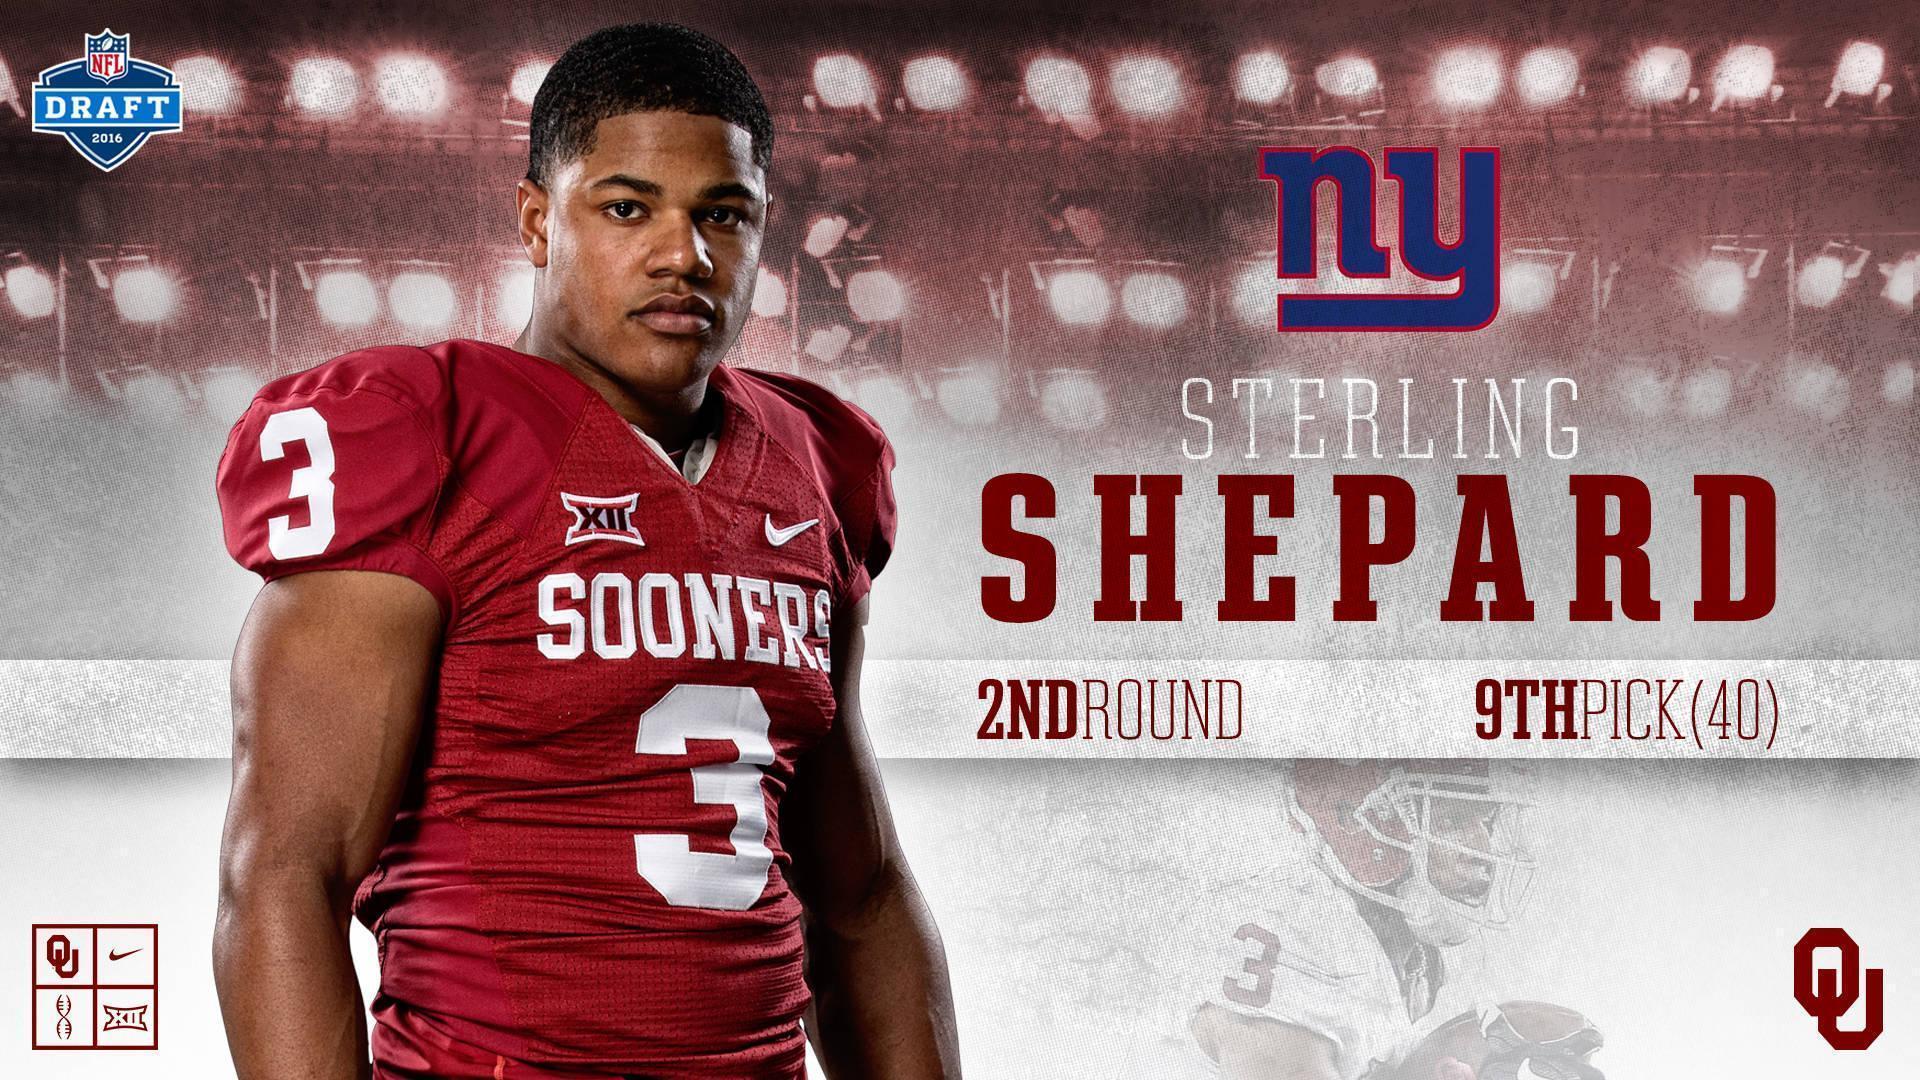 Shepard Goes to Giants in NFL Draft Second Round Official